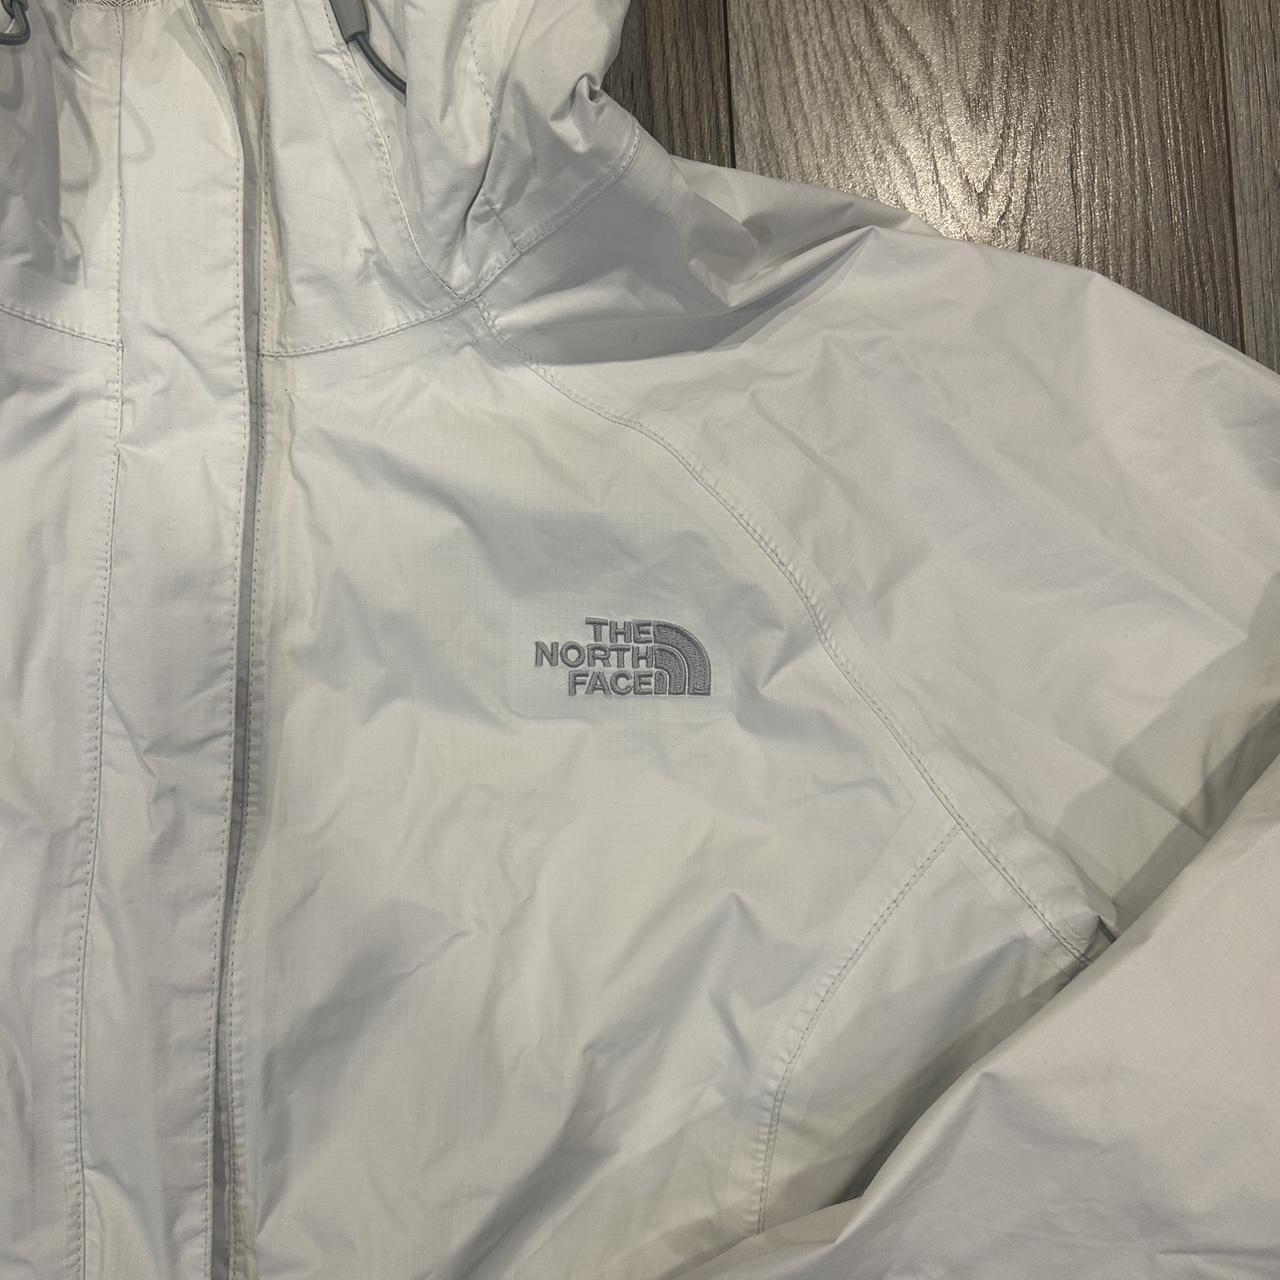 The North Face Women's Jacket (2)